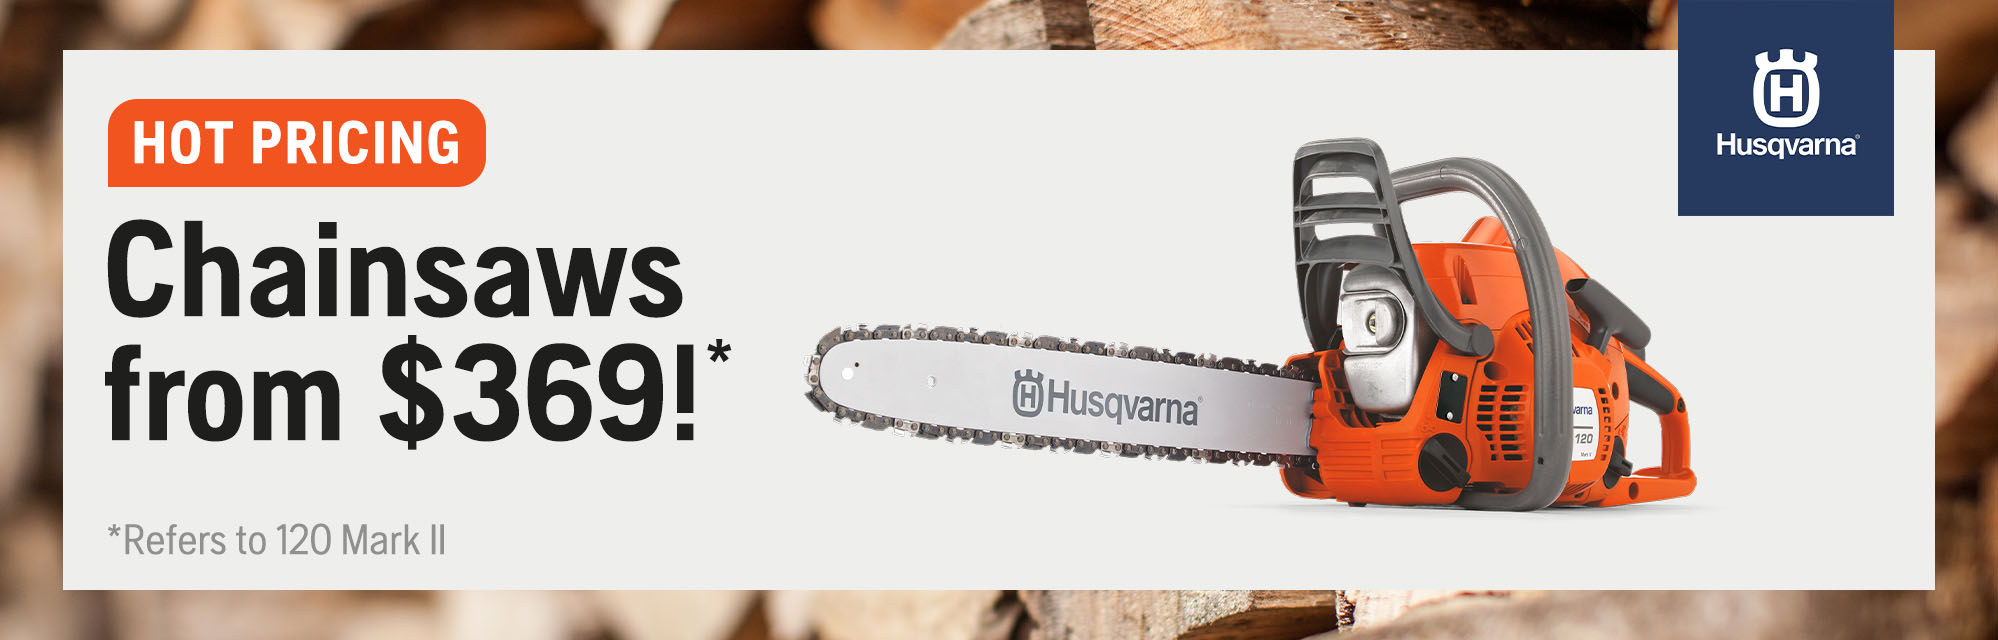 Chainsaws from $369!